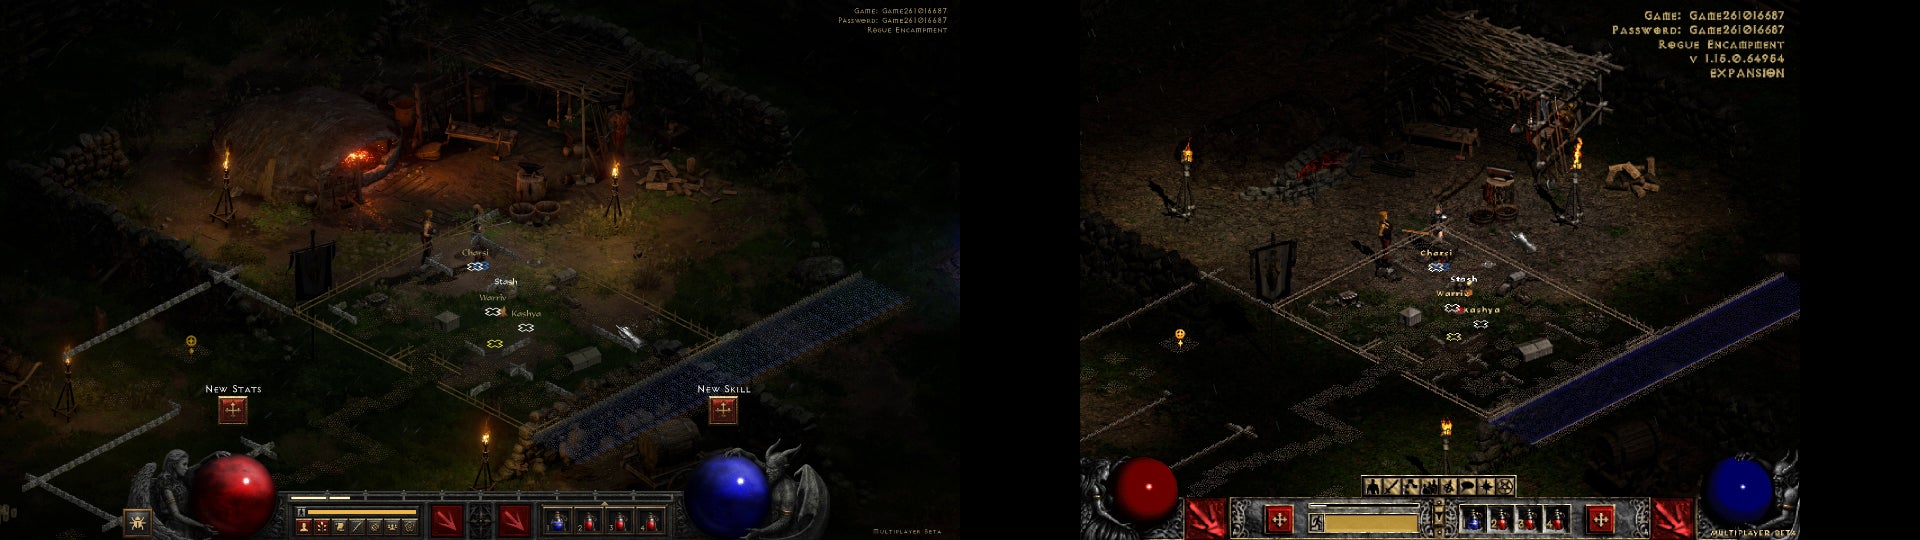 A wide image showing a screenshot of Charsi the blacksmith standing in front of her forge in Diablo II: Resurrected, next to the same scene old version of Diablo II without the enhanced graphics